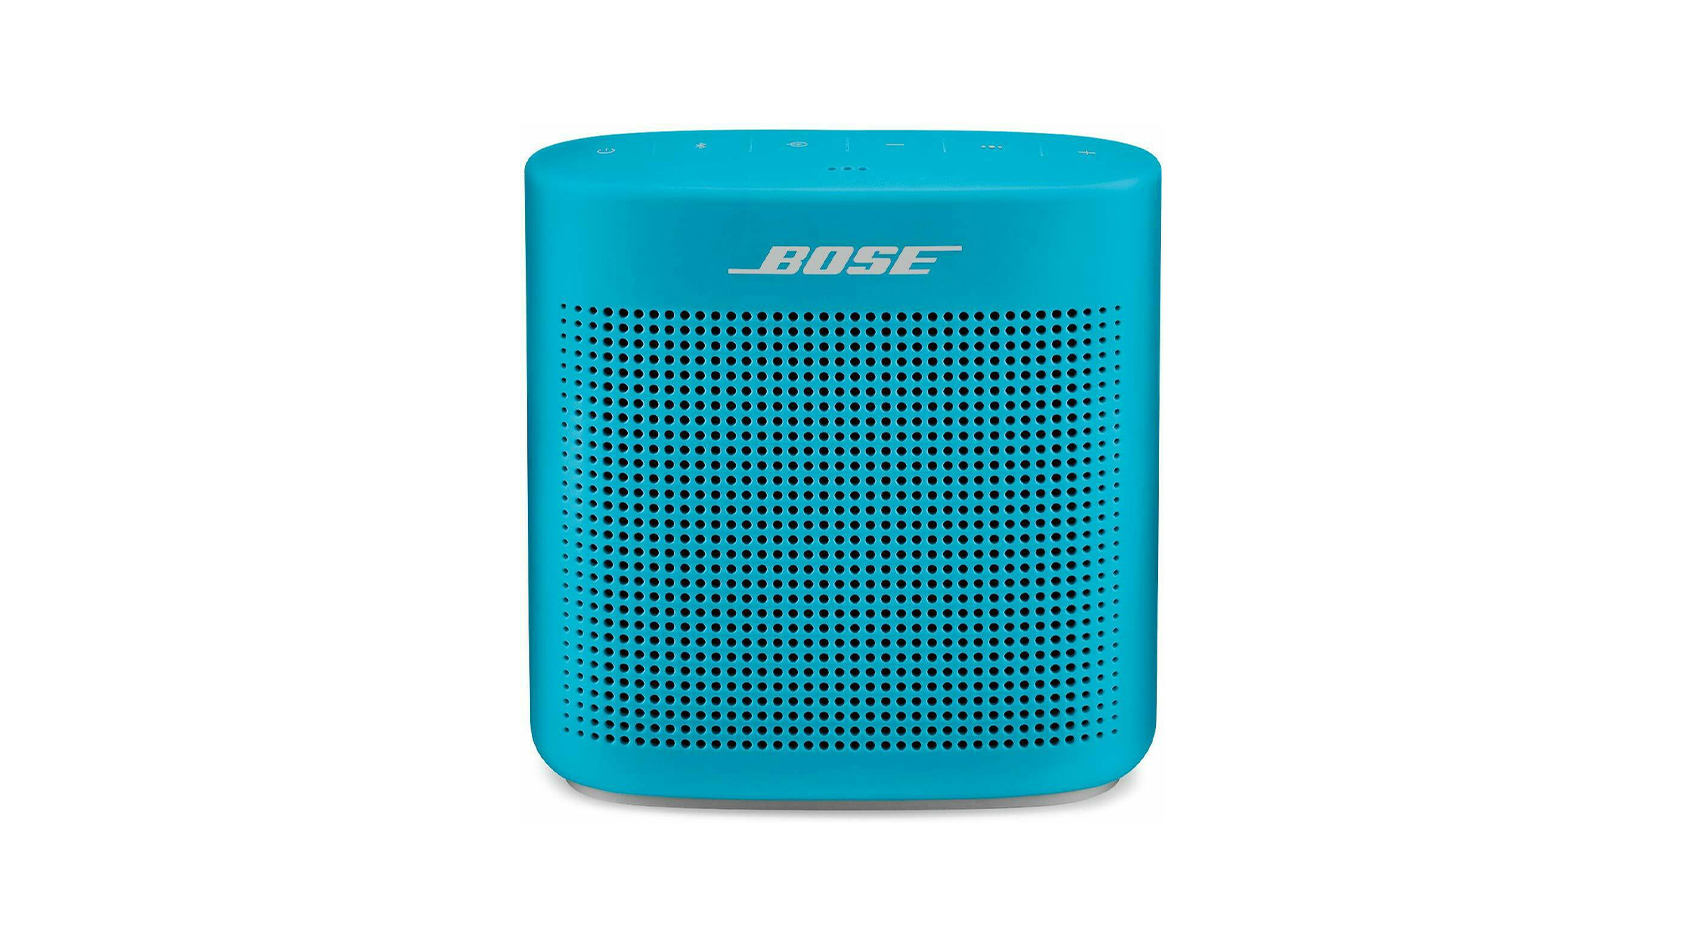 Bose SoundLink Color II in aquamarine against a white background.